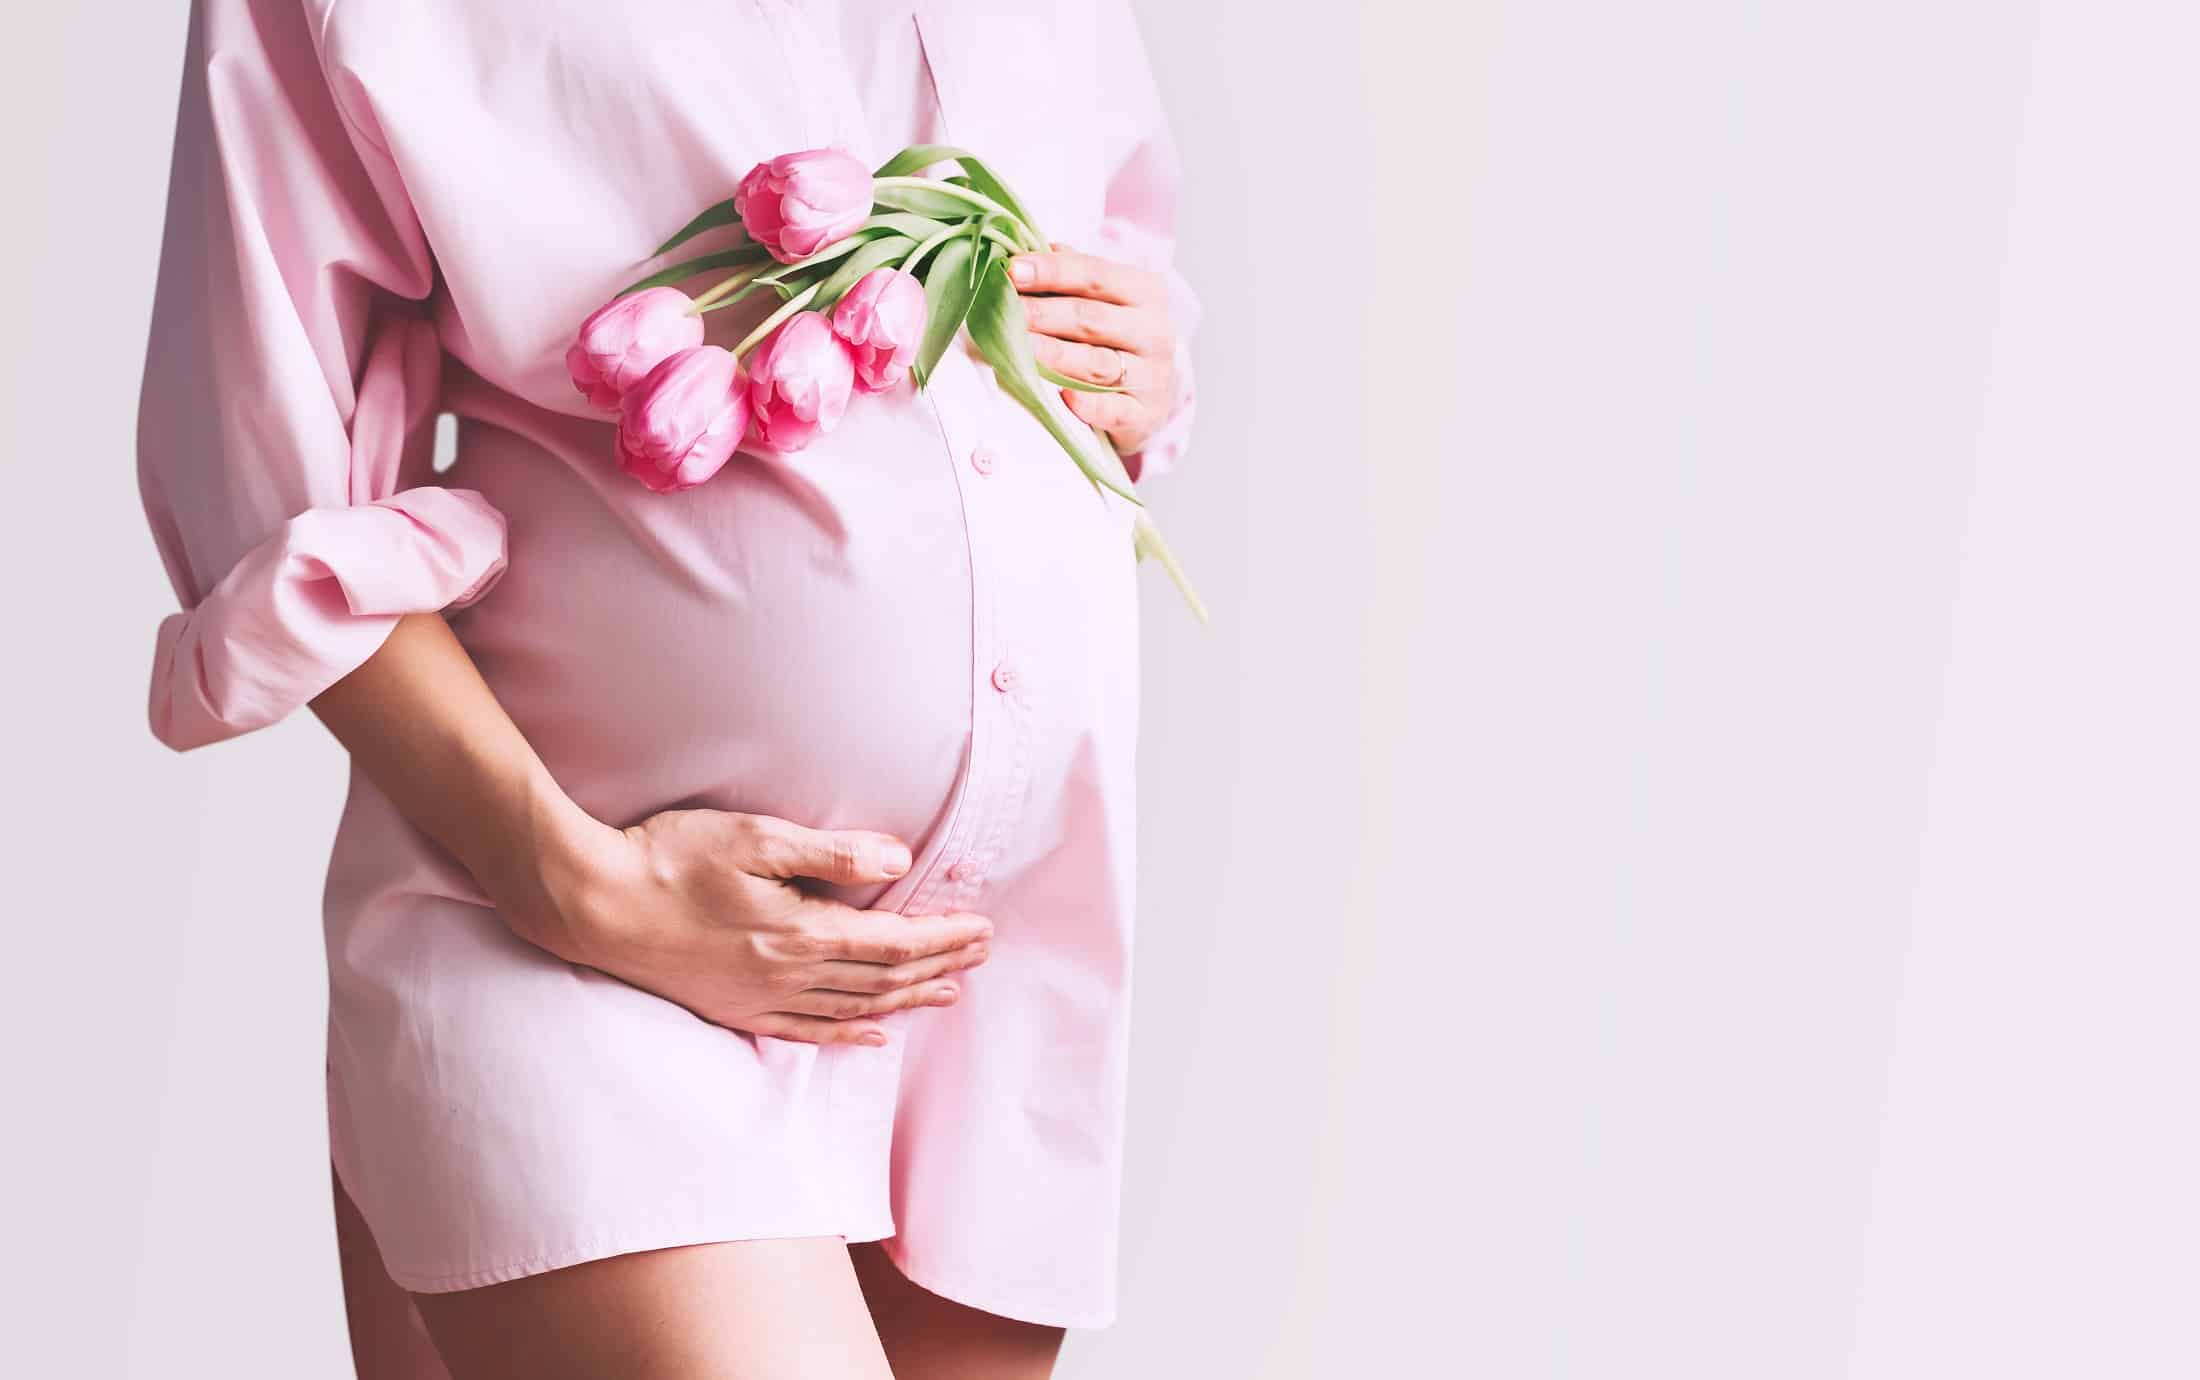 5 facts about the blessed state you should know before you get pregnant